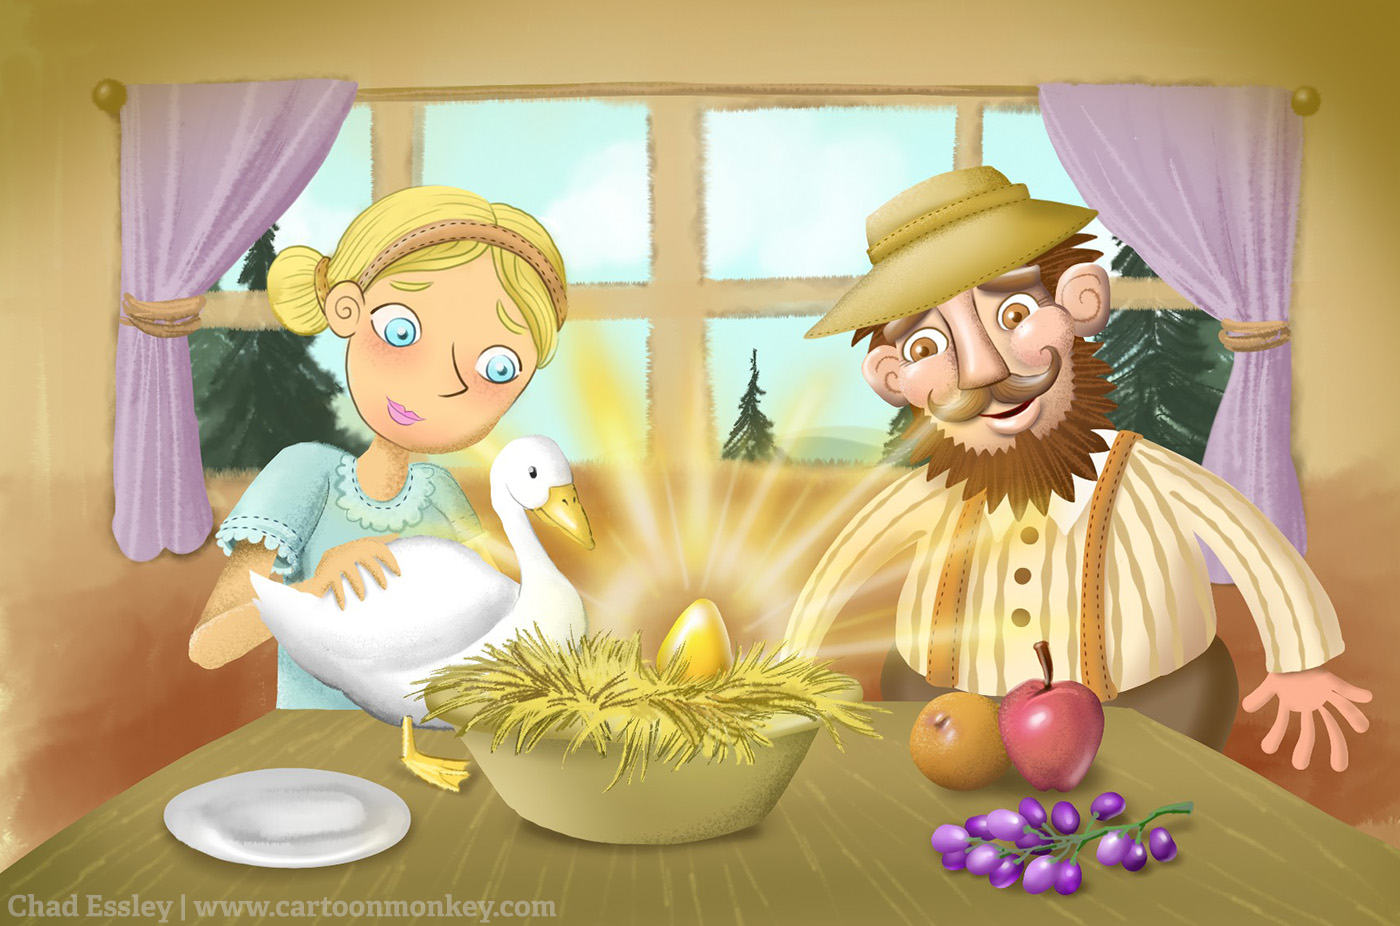 Kids World: The Goose That Laid Golden Eggs